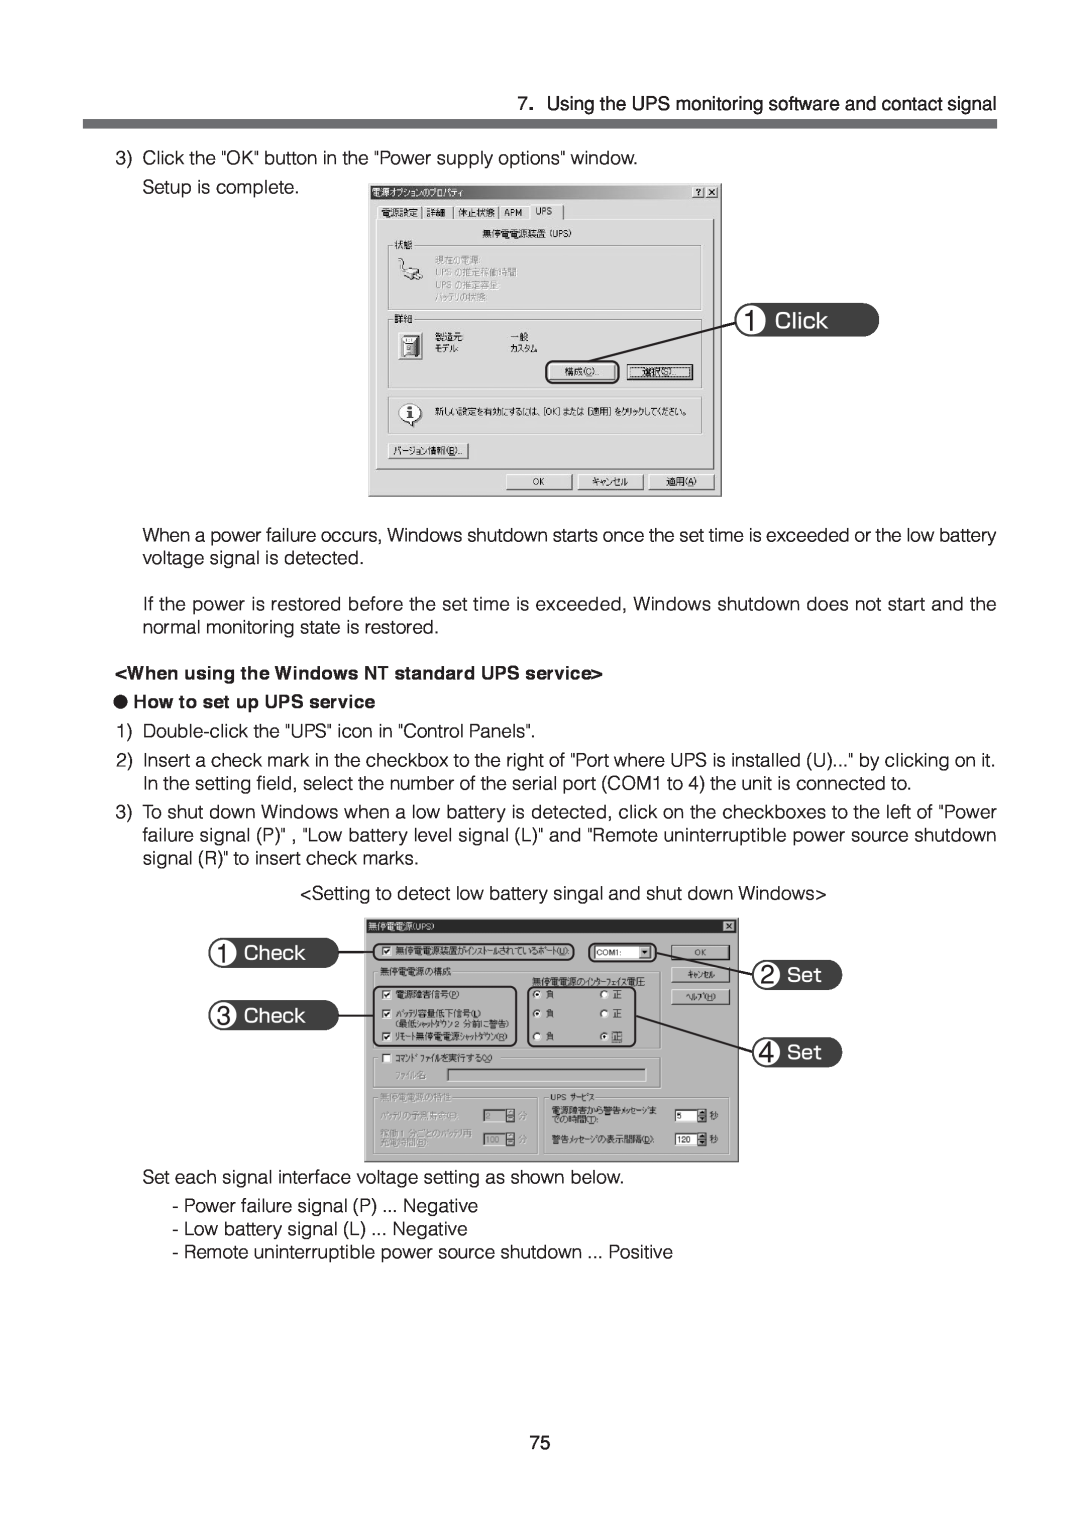 Omron BU1002SW Click, When using the Windows NT standard UPS service, How to set up UPS service, Check Set Check Set 